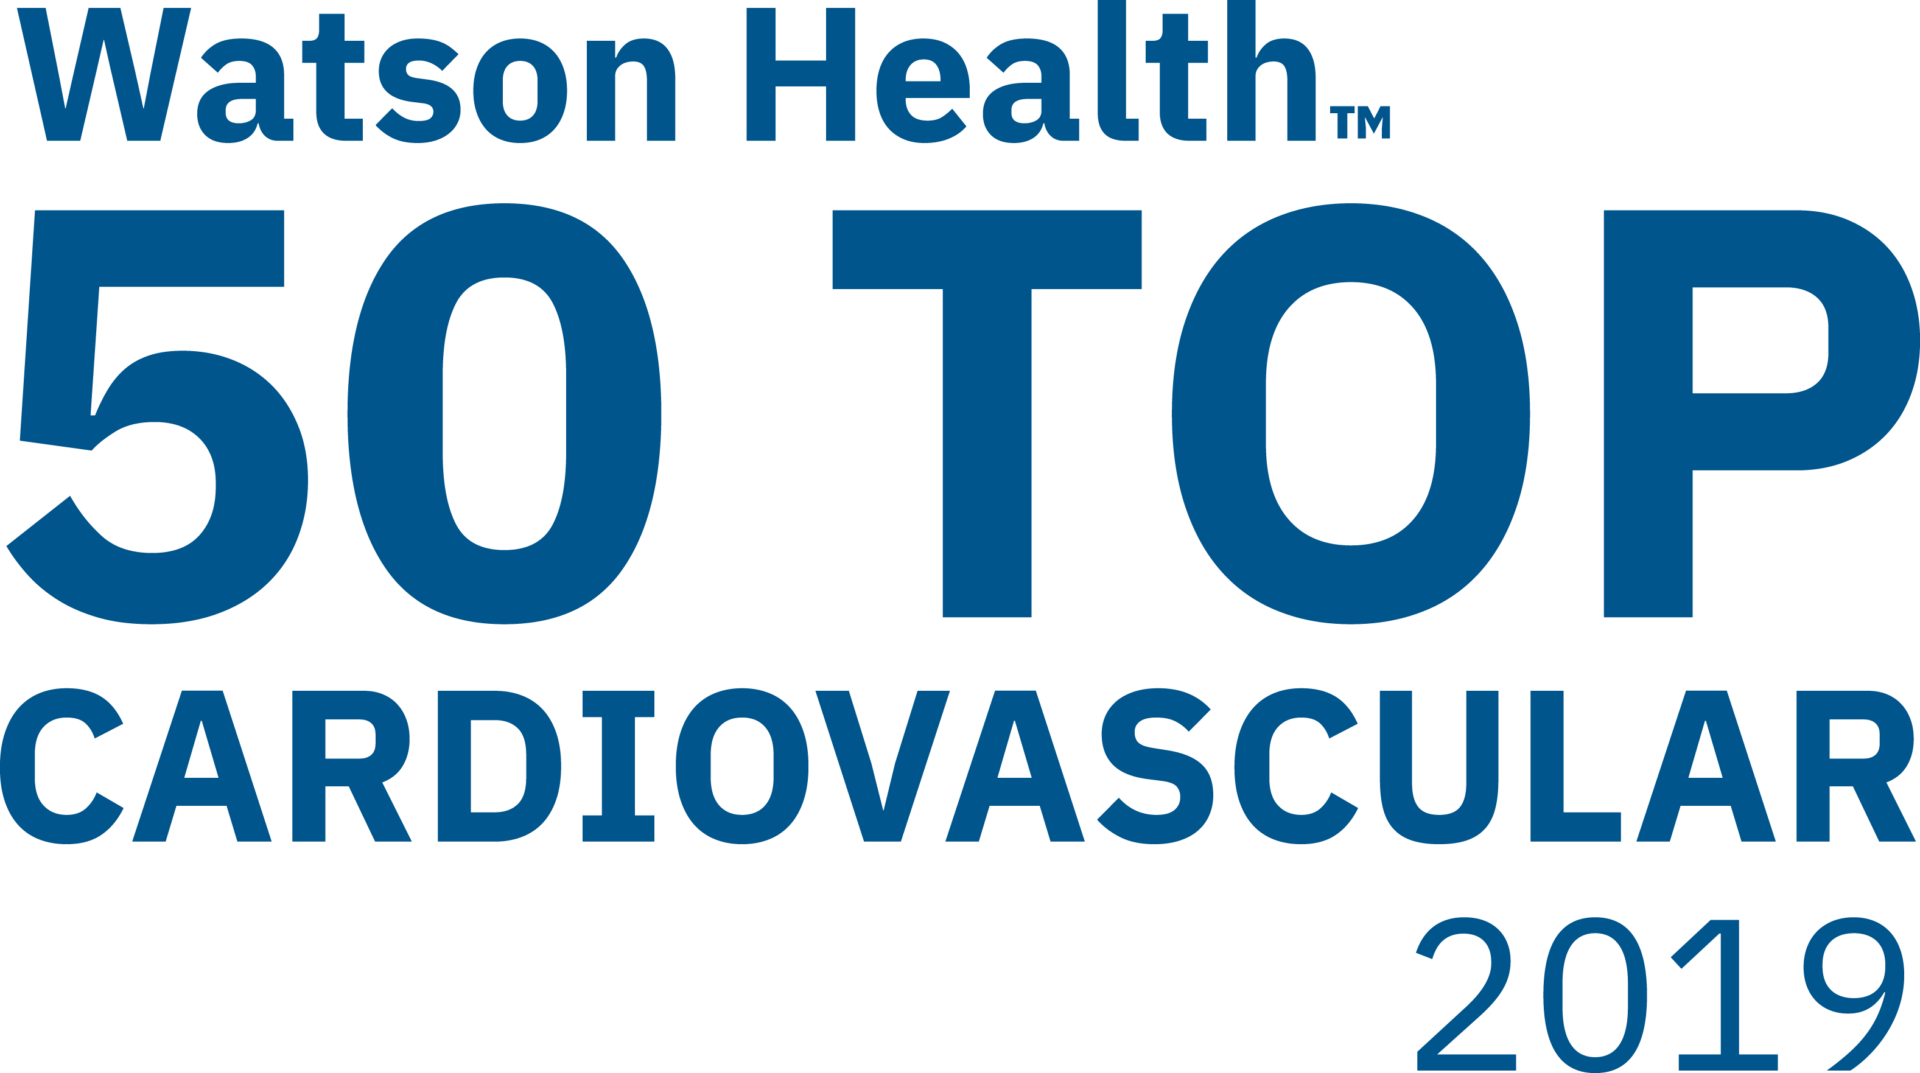 Methodist Medical Center is a 2019 50 Top Cardiovascular Hospitals designee. Methodist is only two hospitals in Tennessee to be included in the Community Hospital category.